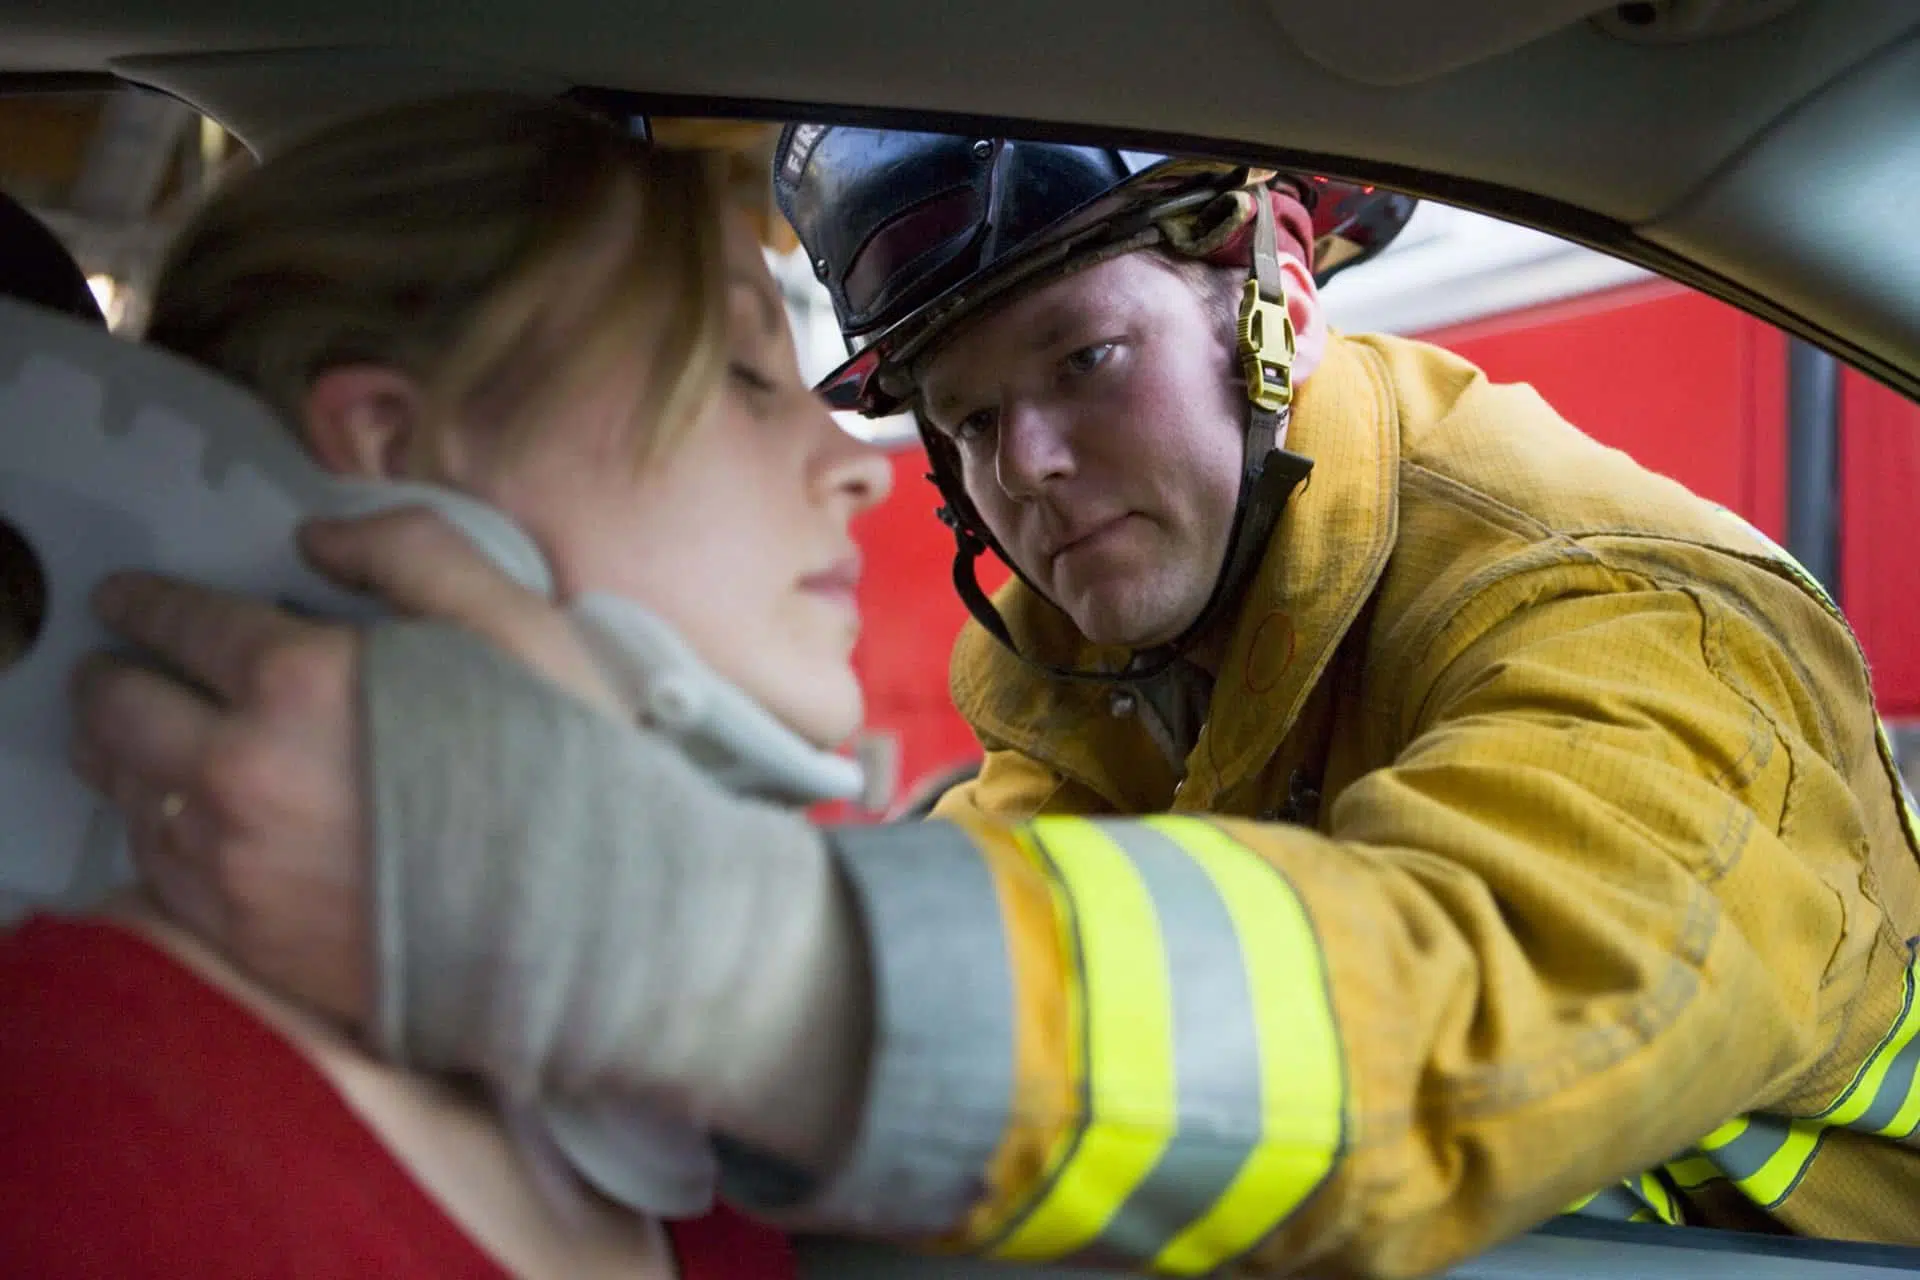 Fireman putting neckbrace on woman injured in an auto accident